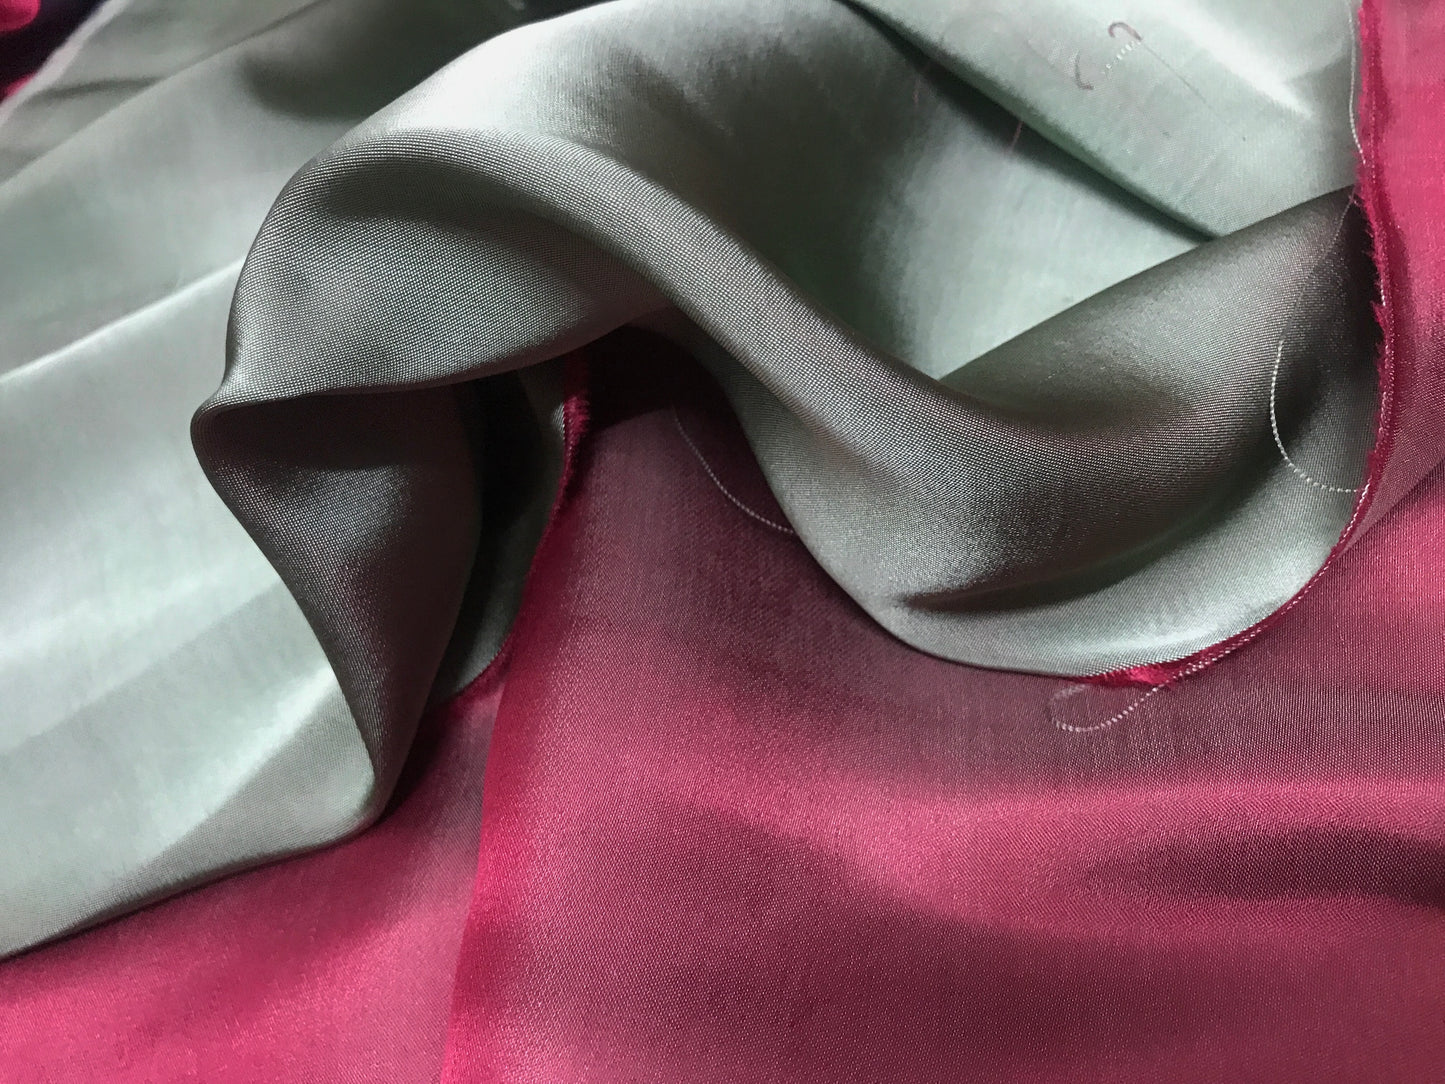 Christmas Silk fabric by the yard - Natural silk - Pure Mulberry Silk - Handmade in VietNam - Green and Red silk